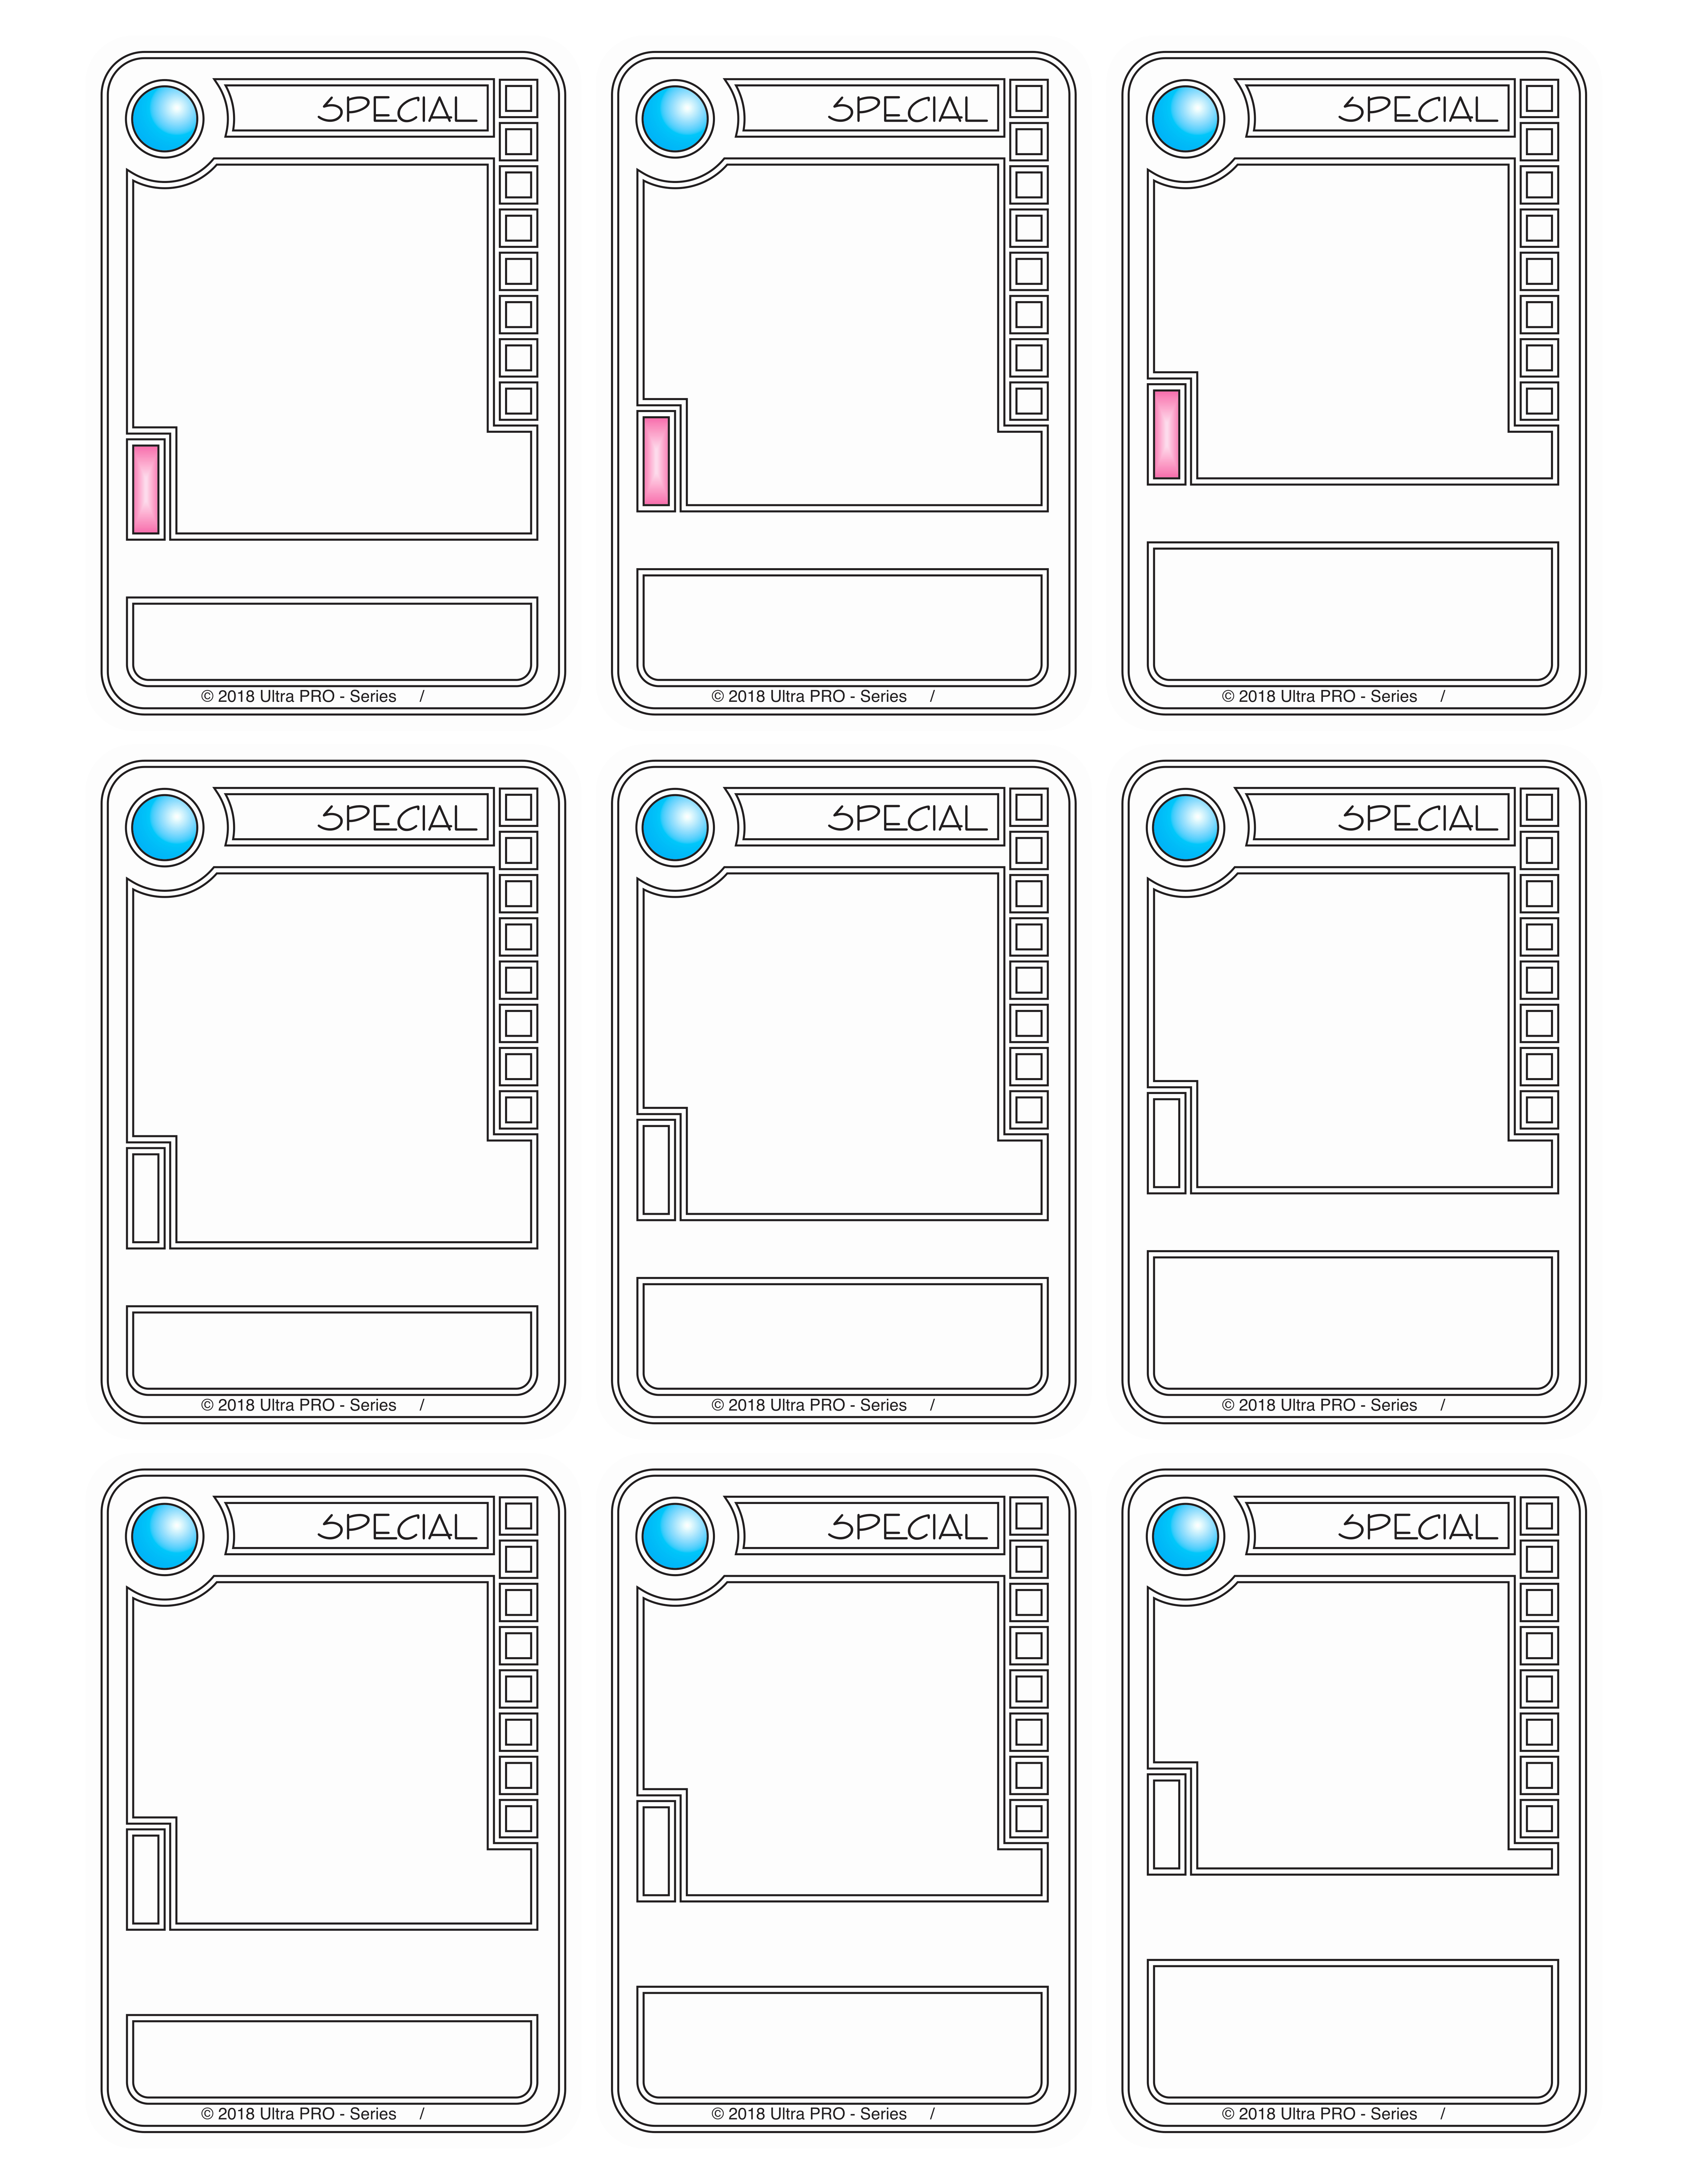 Trading Card Game Card Templates to Pin On